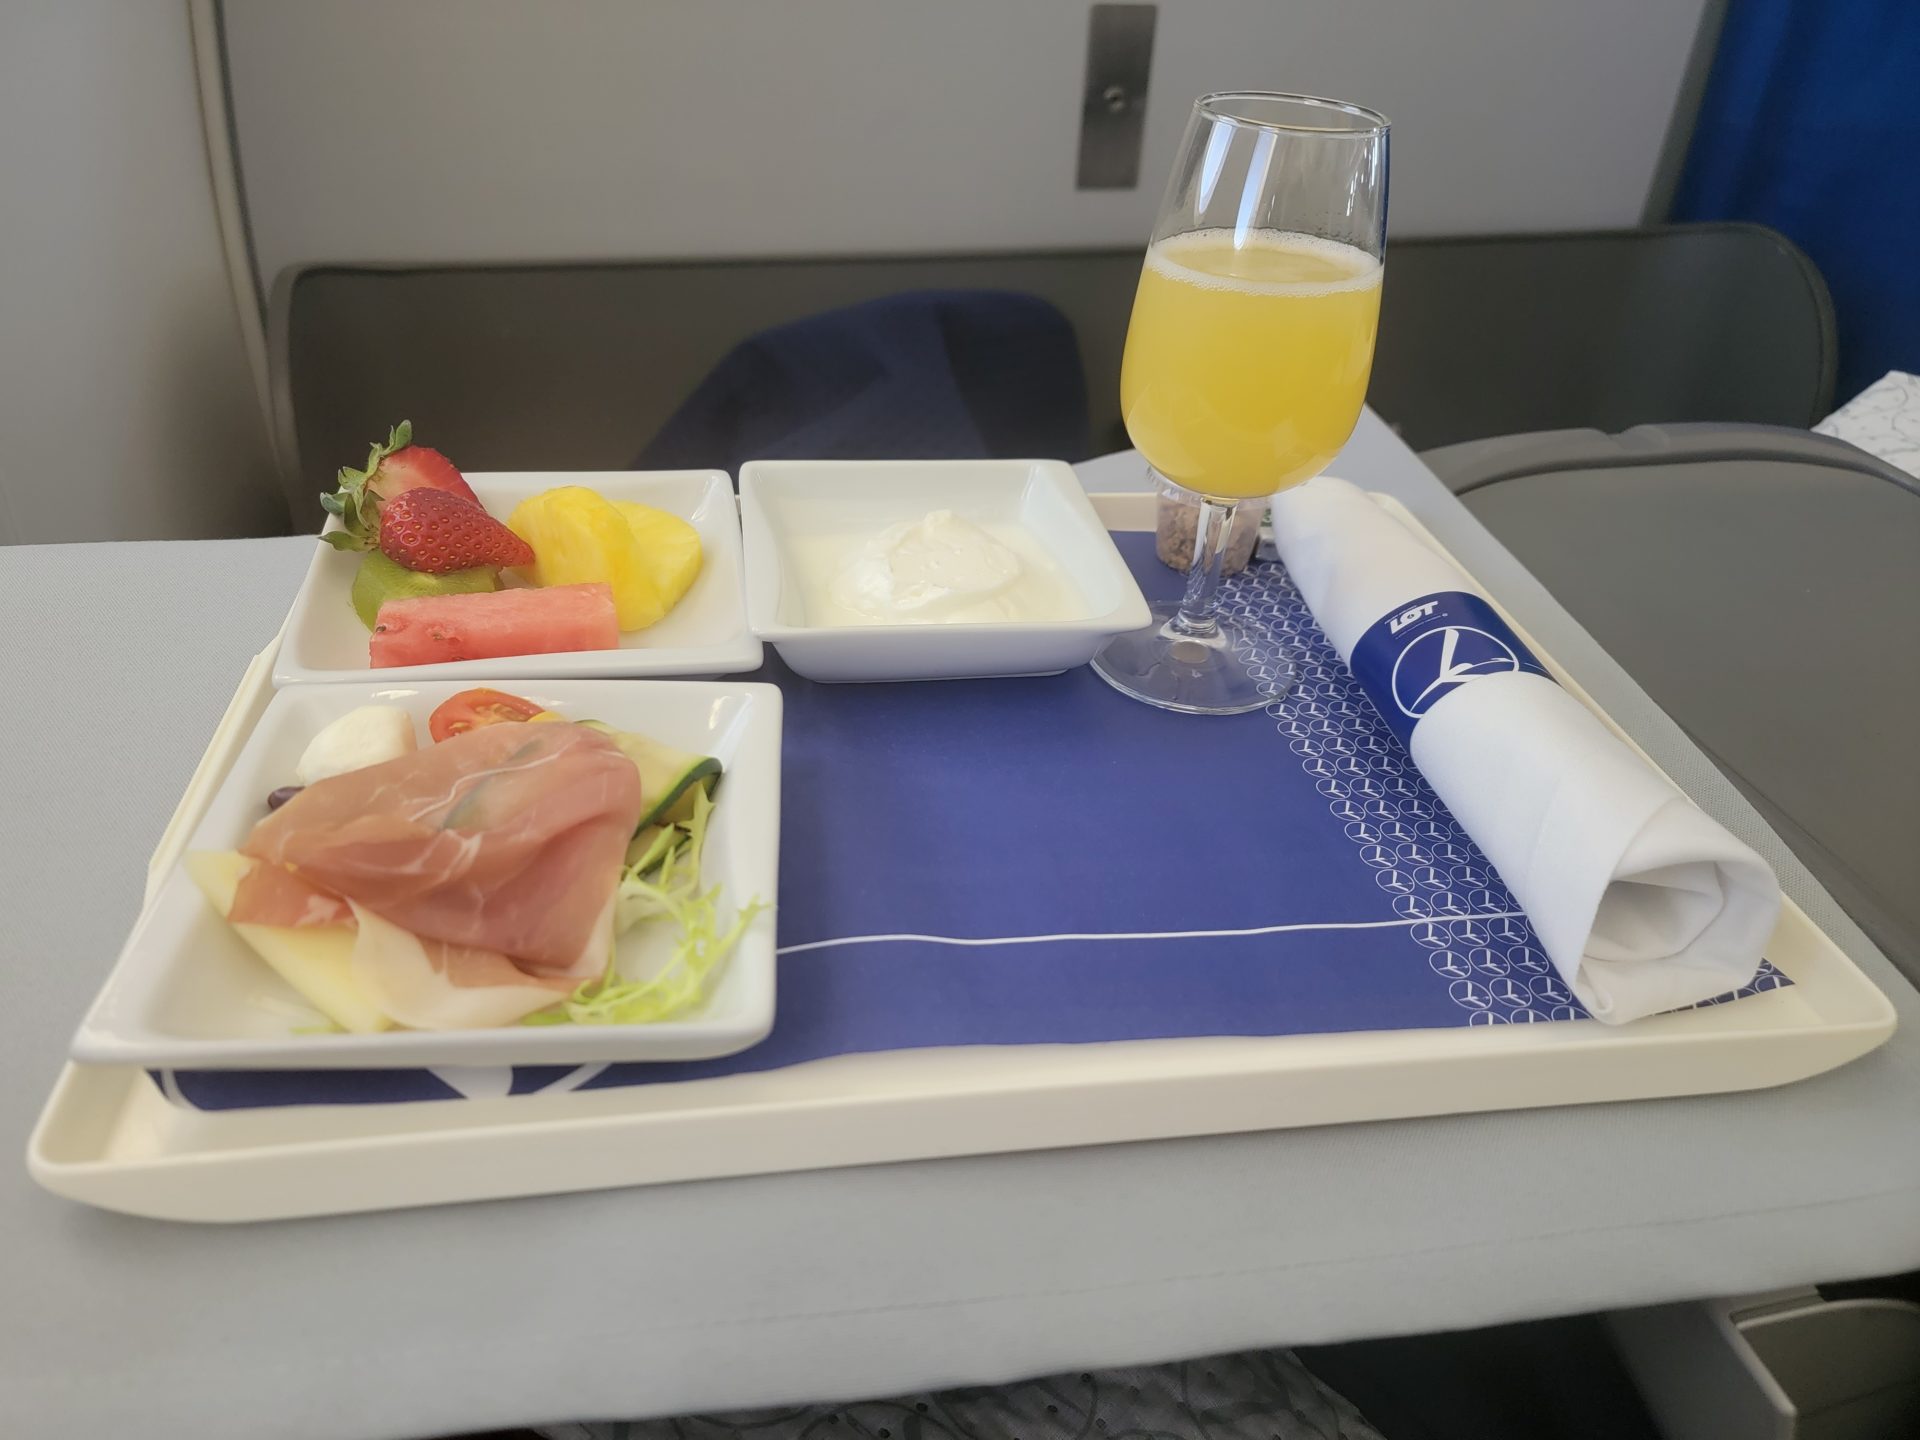 a tray with food and a glass of juice on it